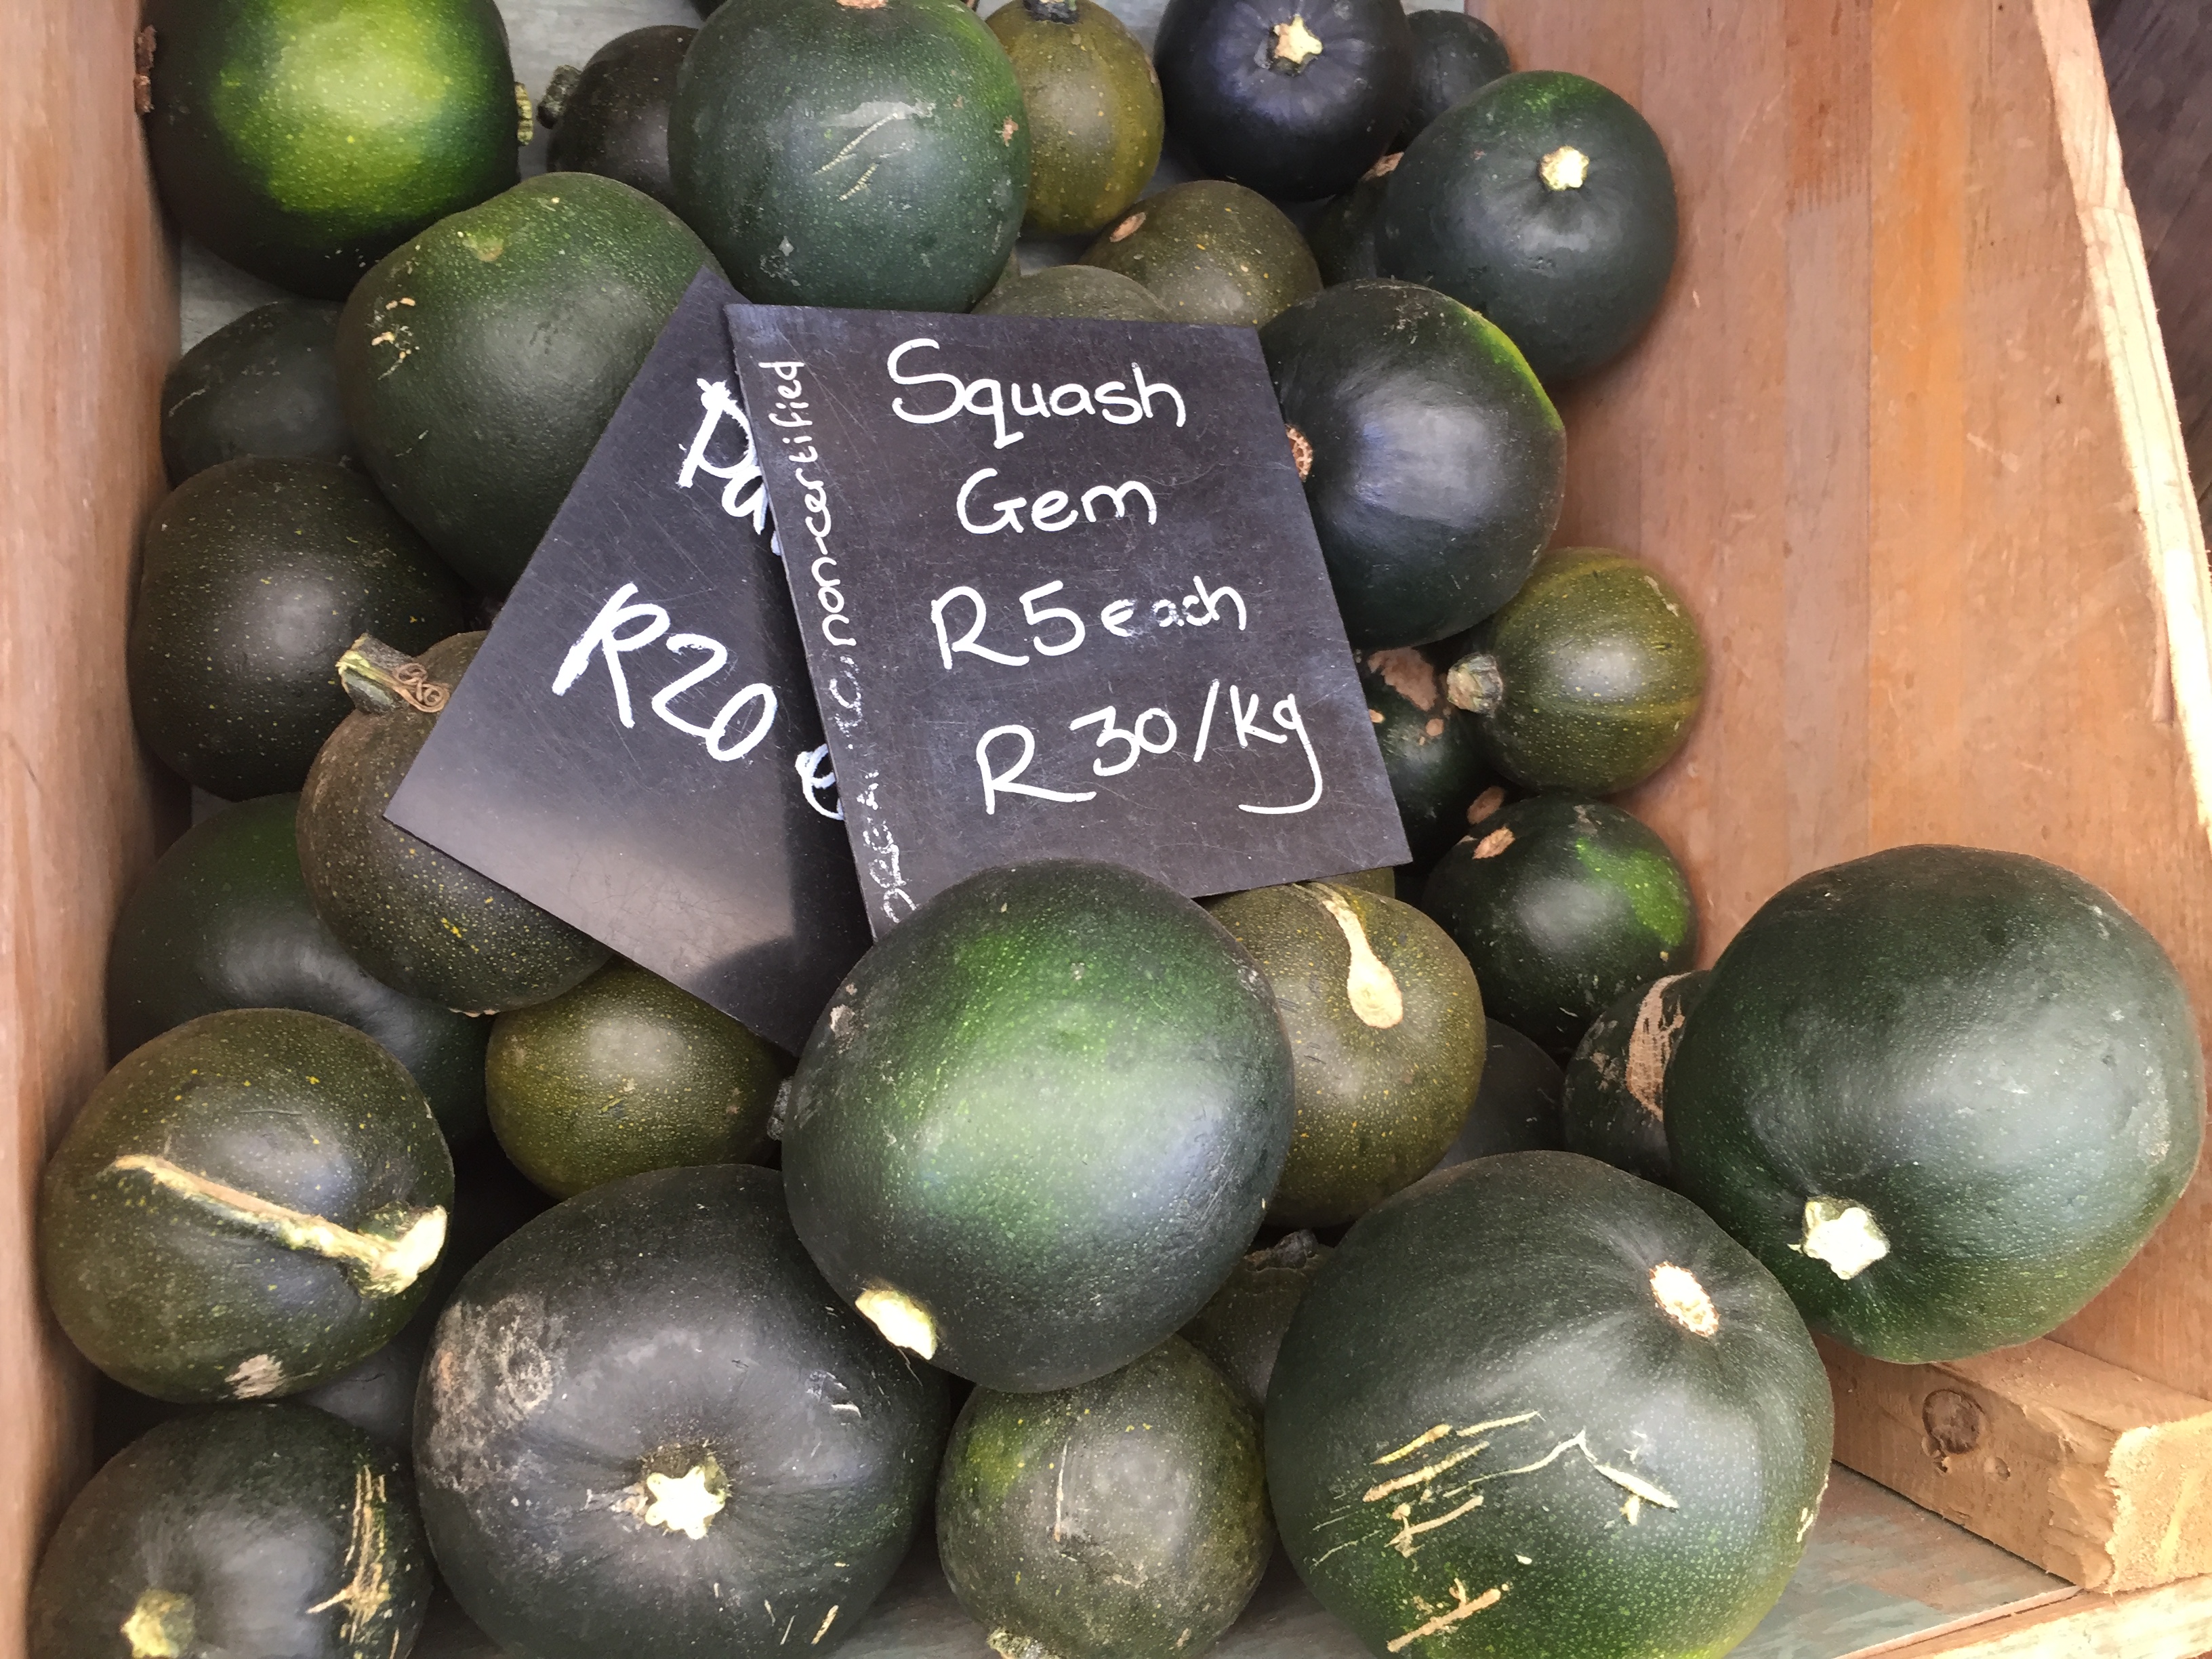 Organic gemsquash at the granger Bay Market, Cape Town, South Africa - Copyright South Africa